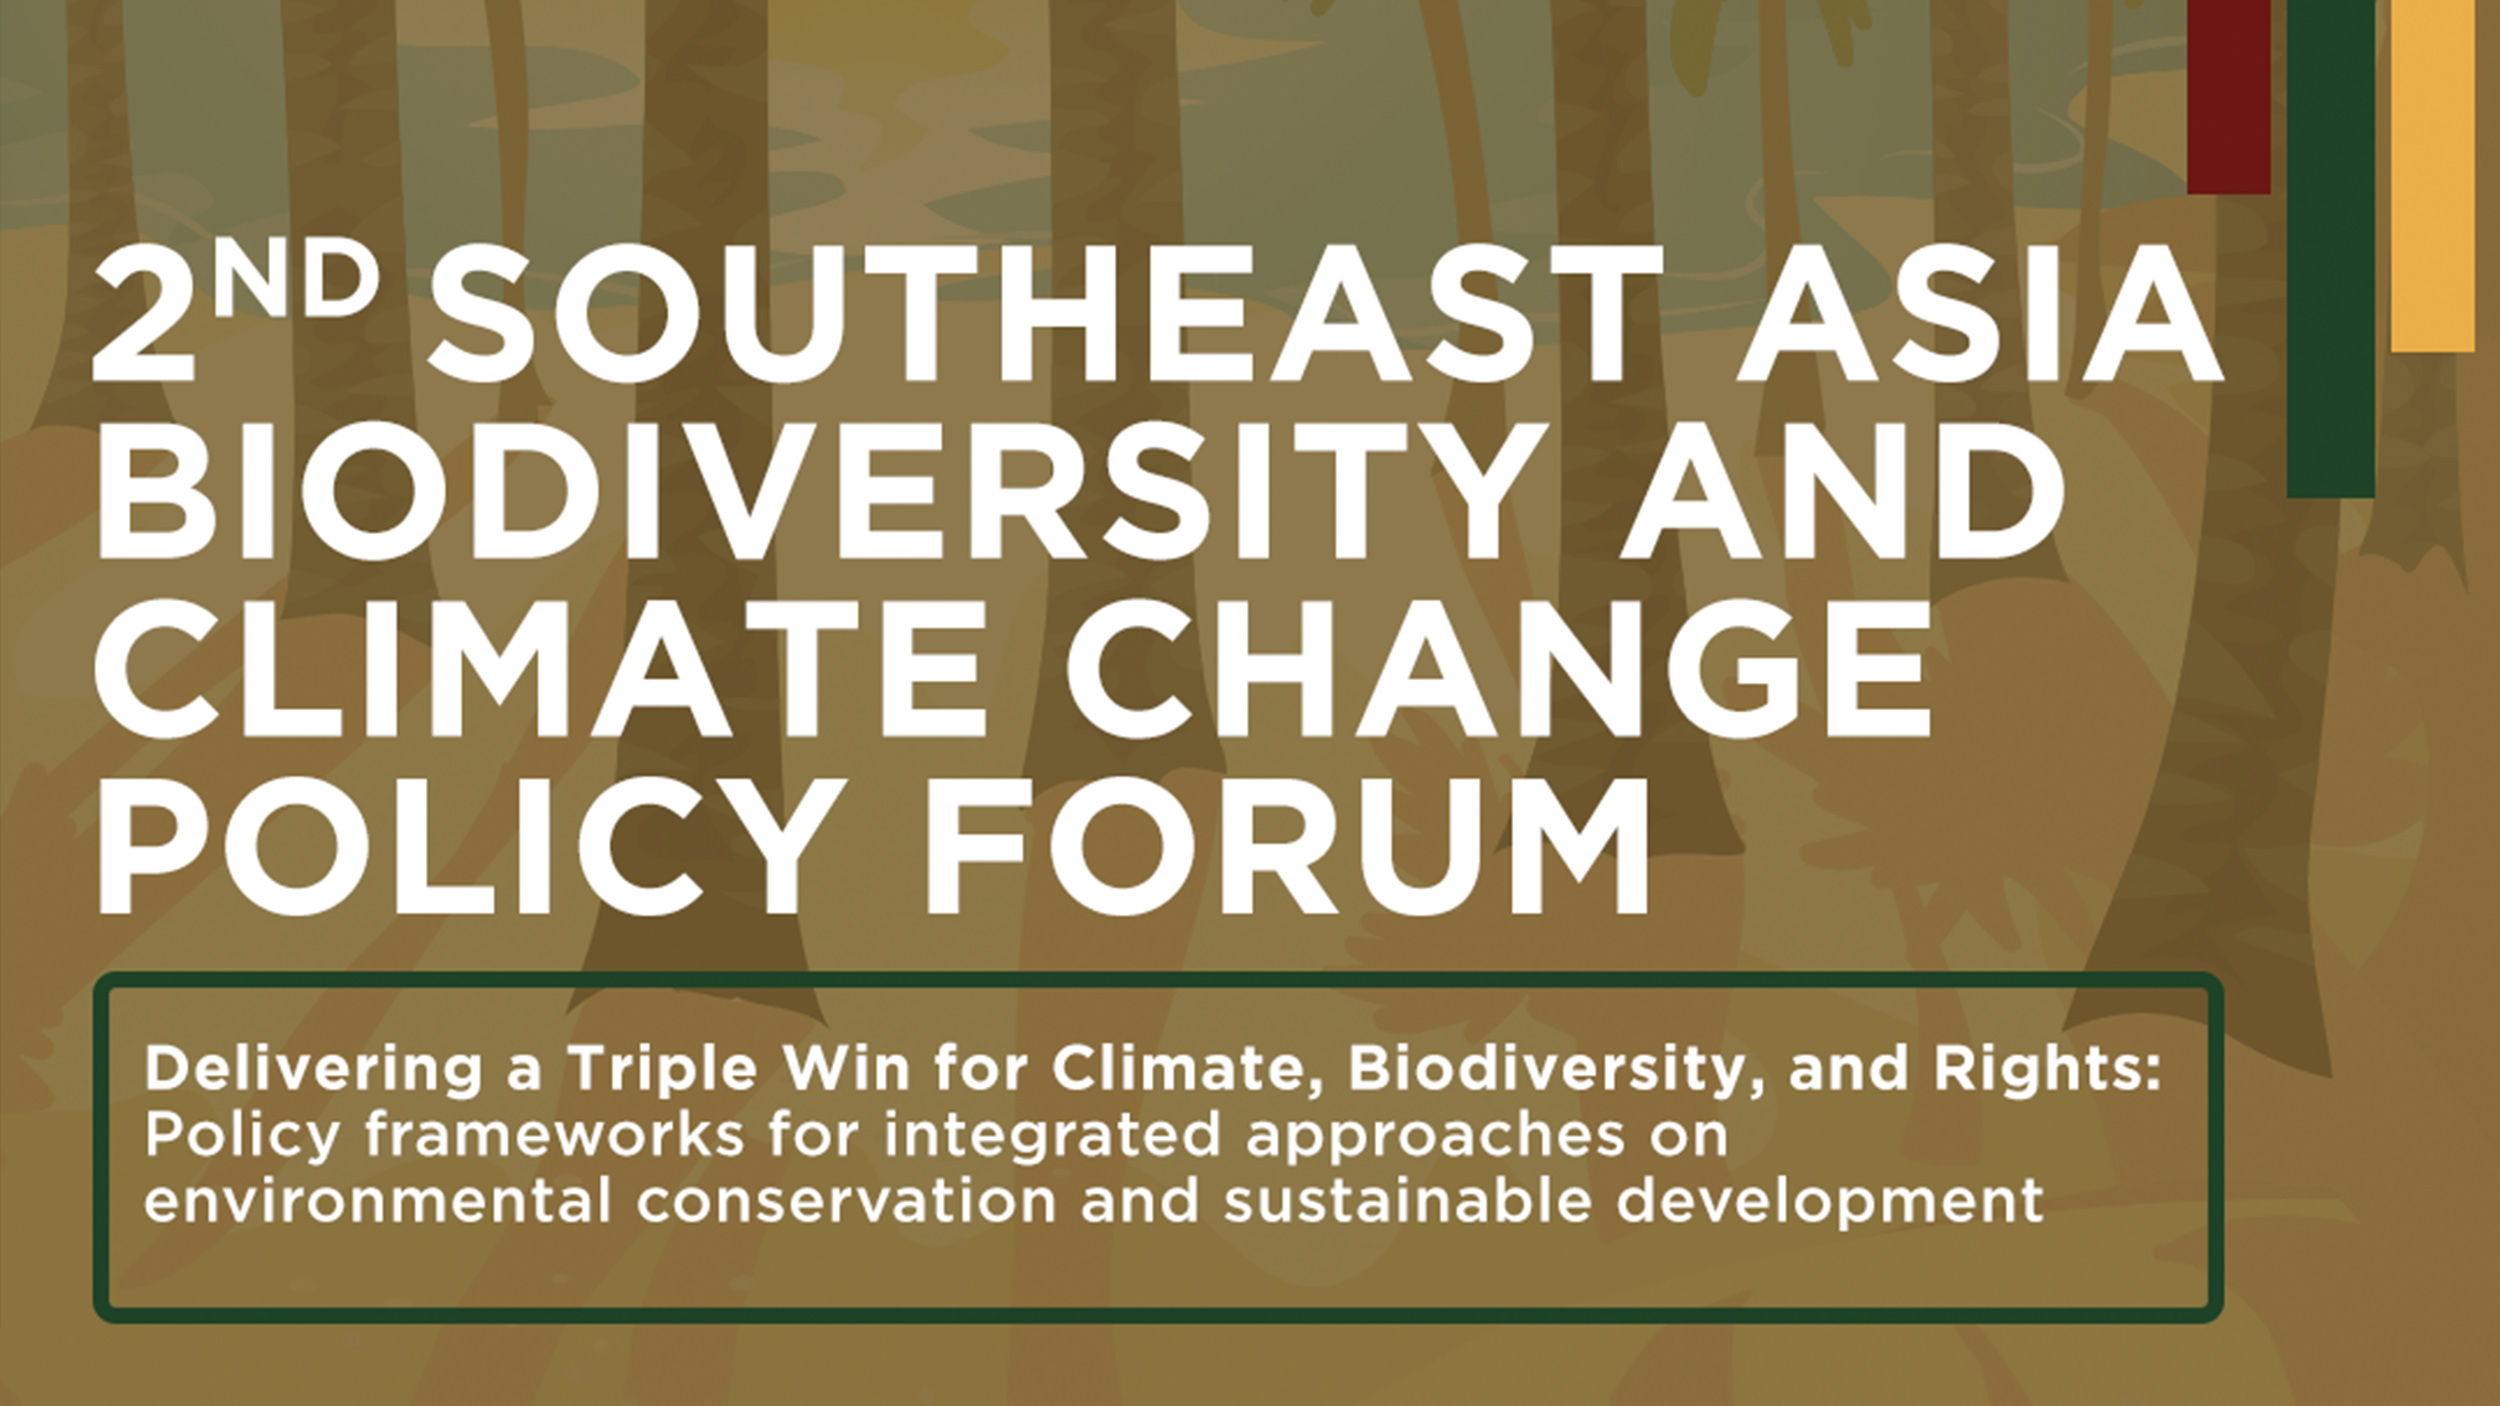 2nd Southeast Asia Biodiversity and Climate Change Policy Forum